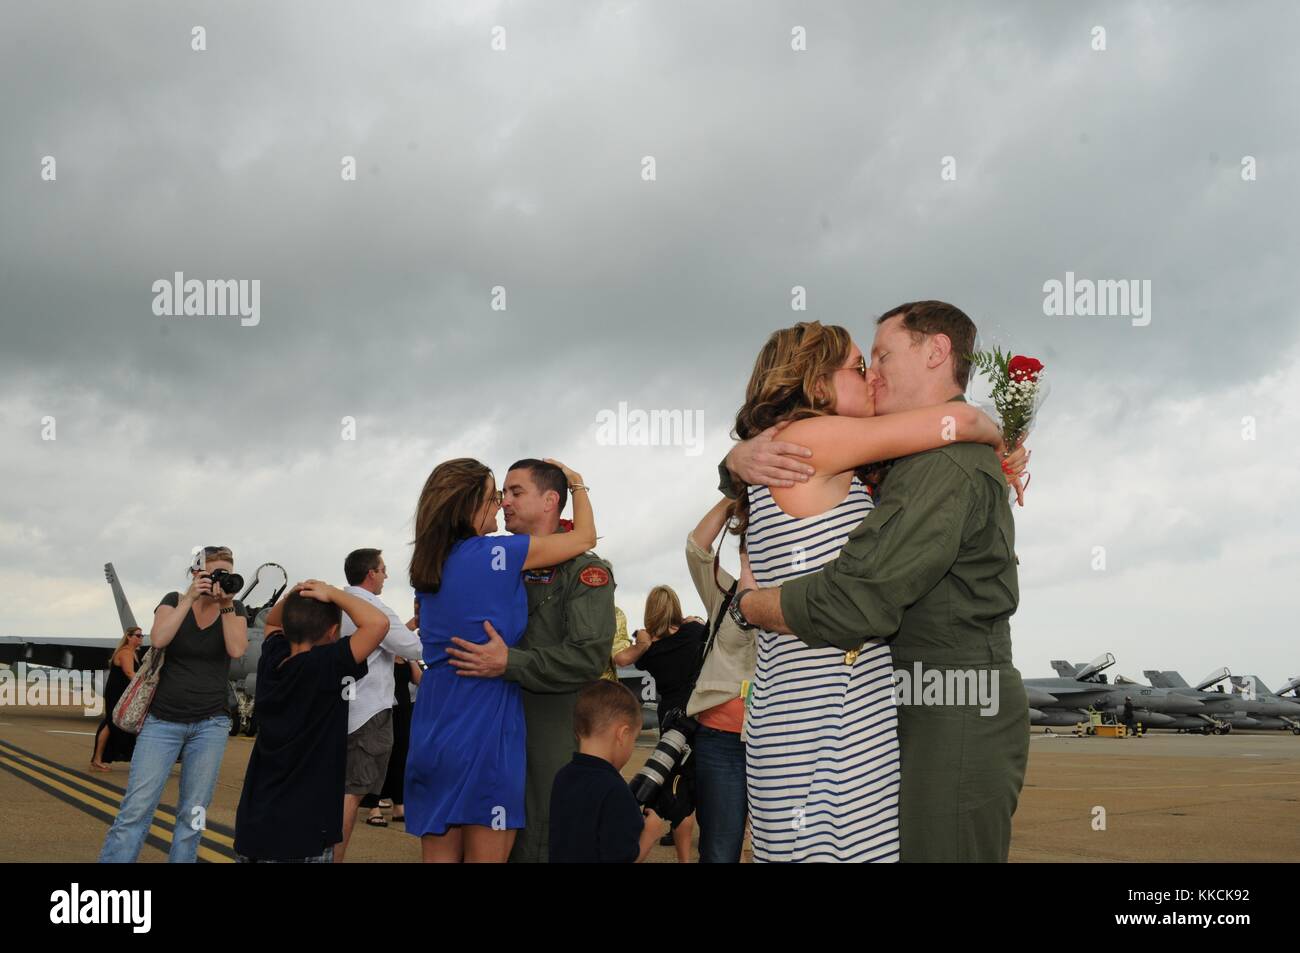 Commander Richard Rivera, left, and Lt Ben Horn, both assigned to the Sunliners of Strike Fighter Squadron VFA 81, are reunited with their families after returning home from a six-month deployment, Virginia Beach, Va. Image courtesy Mass Communication Specialist 3rd Class Antonio P. Turretto Ramos/US Navy, 2012. Stock Photo